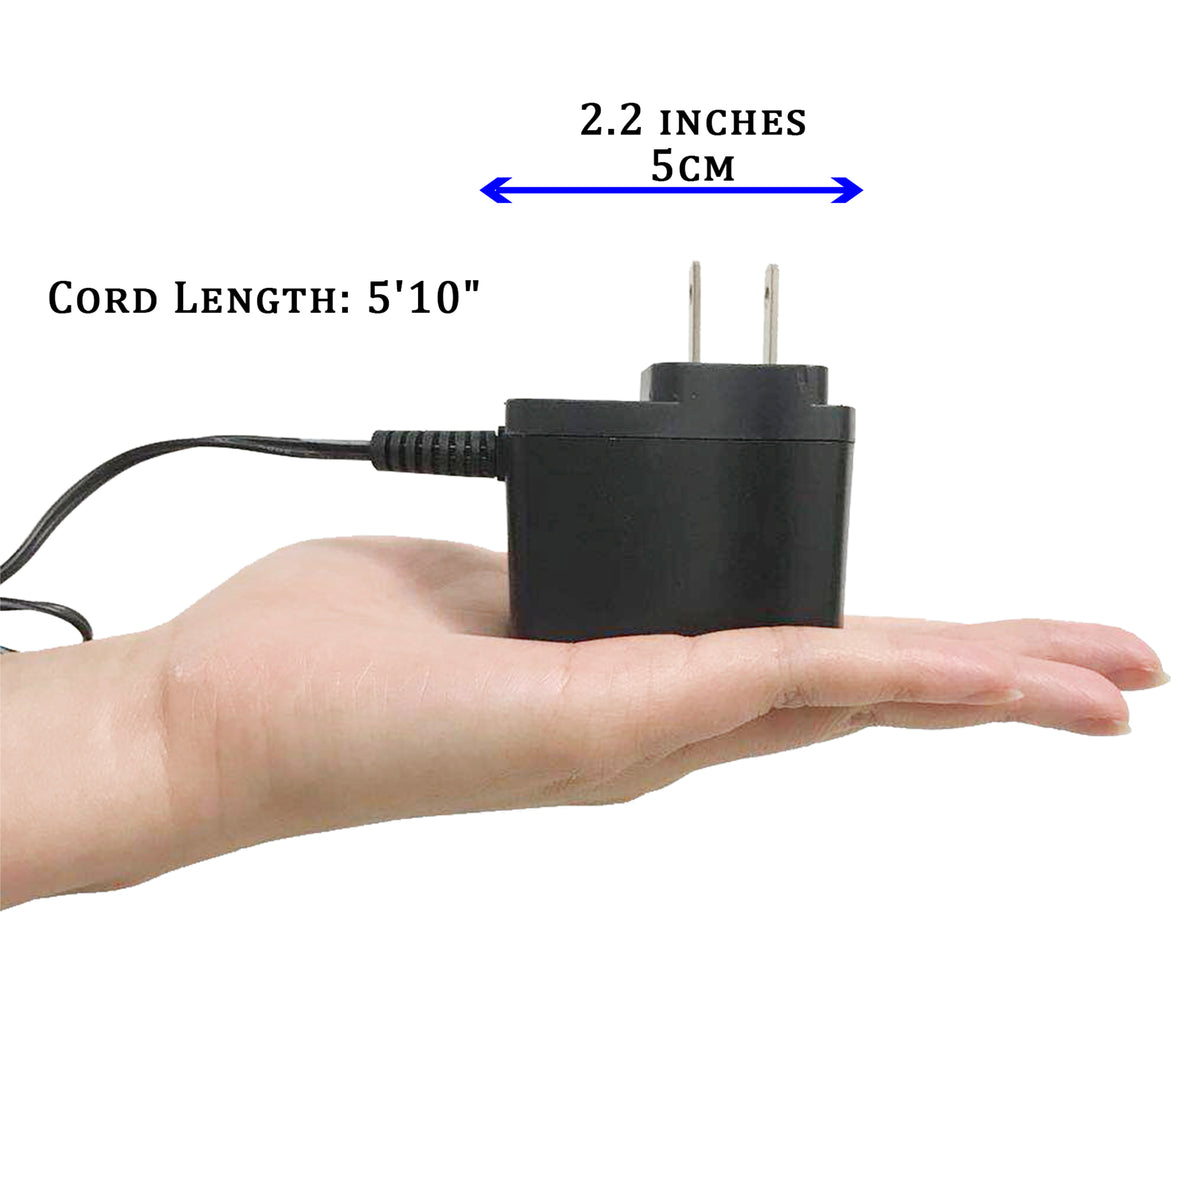 AC Adapter for Sensor Trash Can dimensions